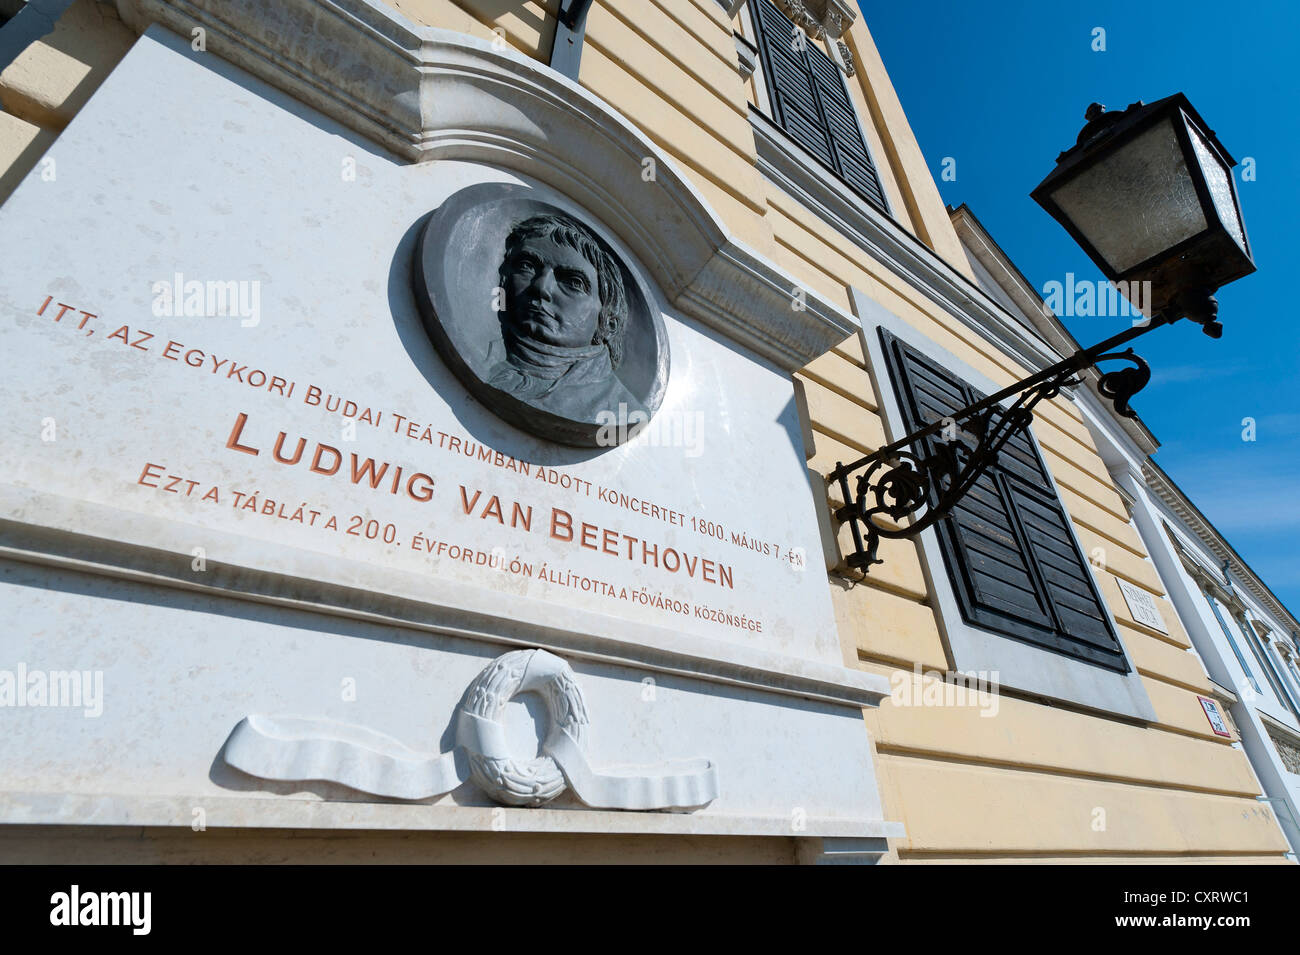 Commemorative plaque for a concert by Ludwig van Beethoven in 1800, Budapest, Hungary, Europe Stock Photo